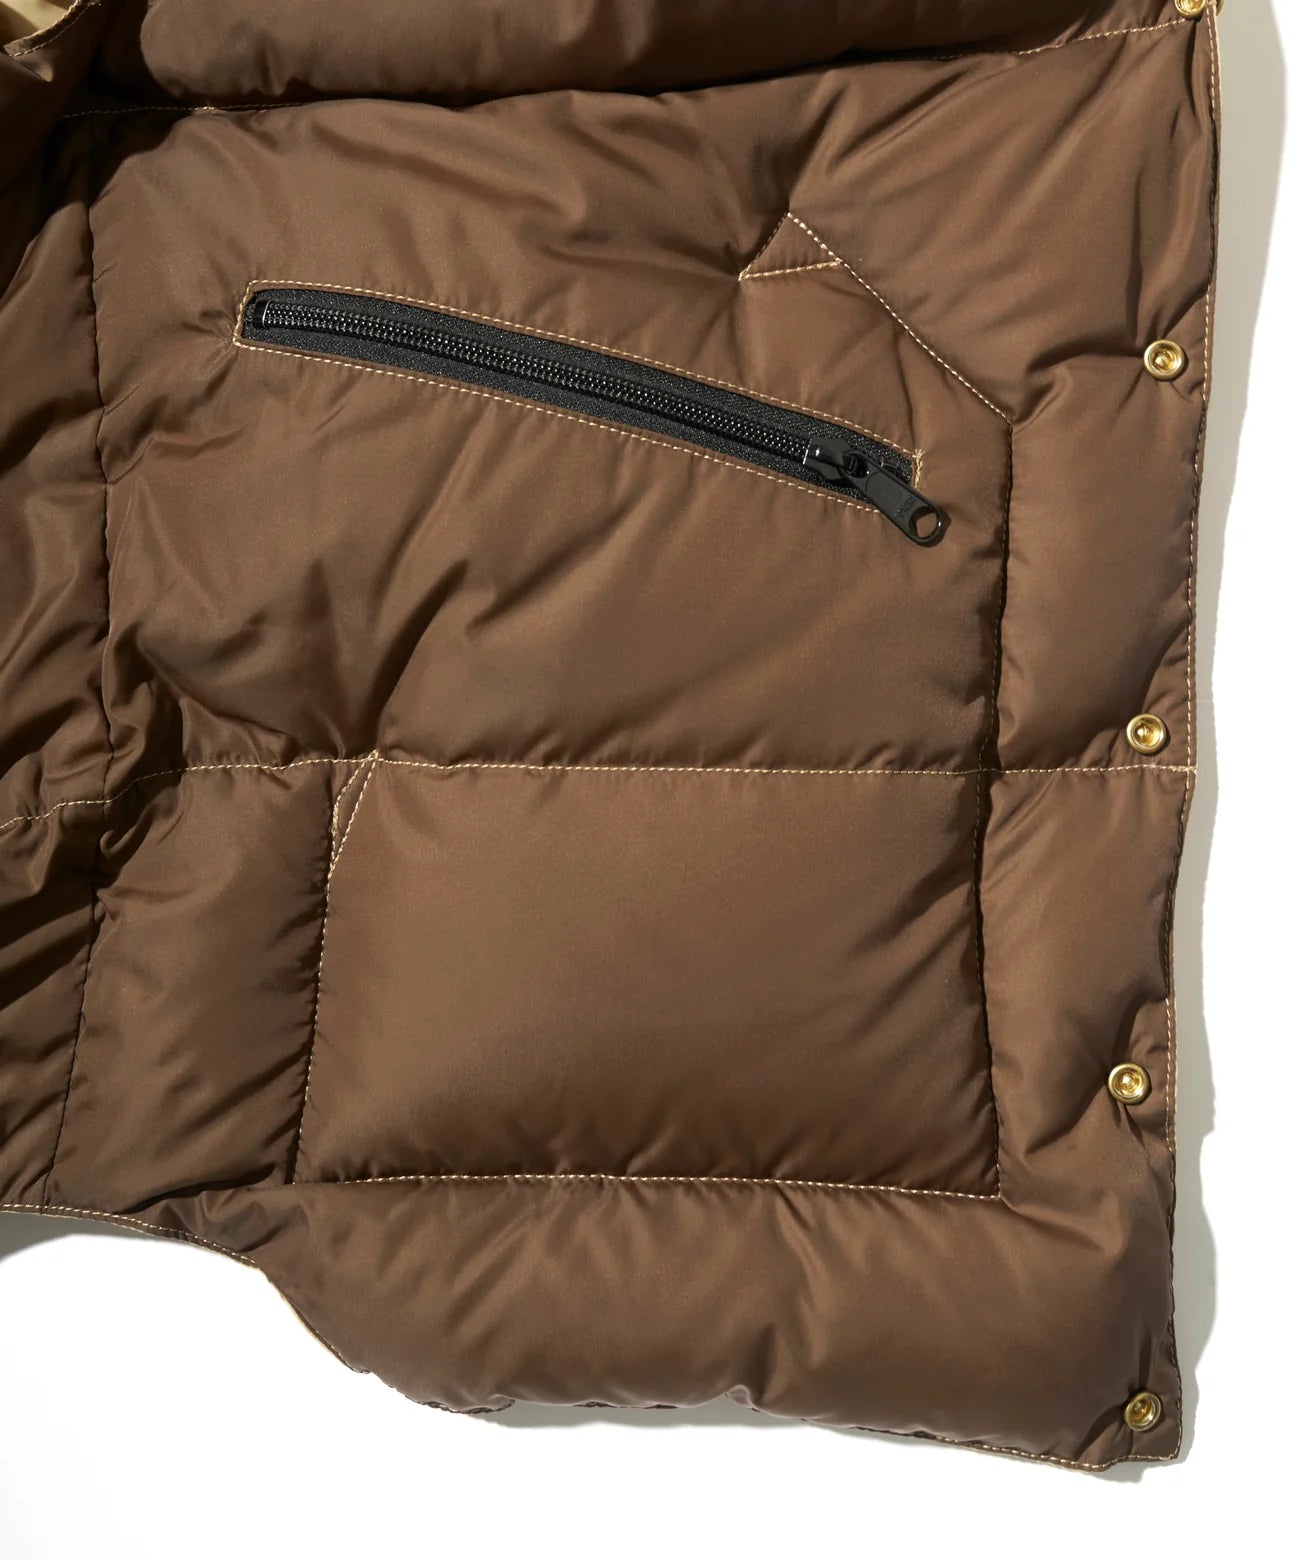 ROCKY MOUNTAIN FEATHERBED DOWN VEST